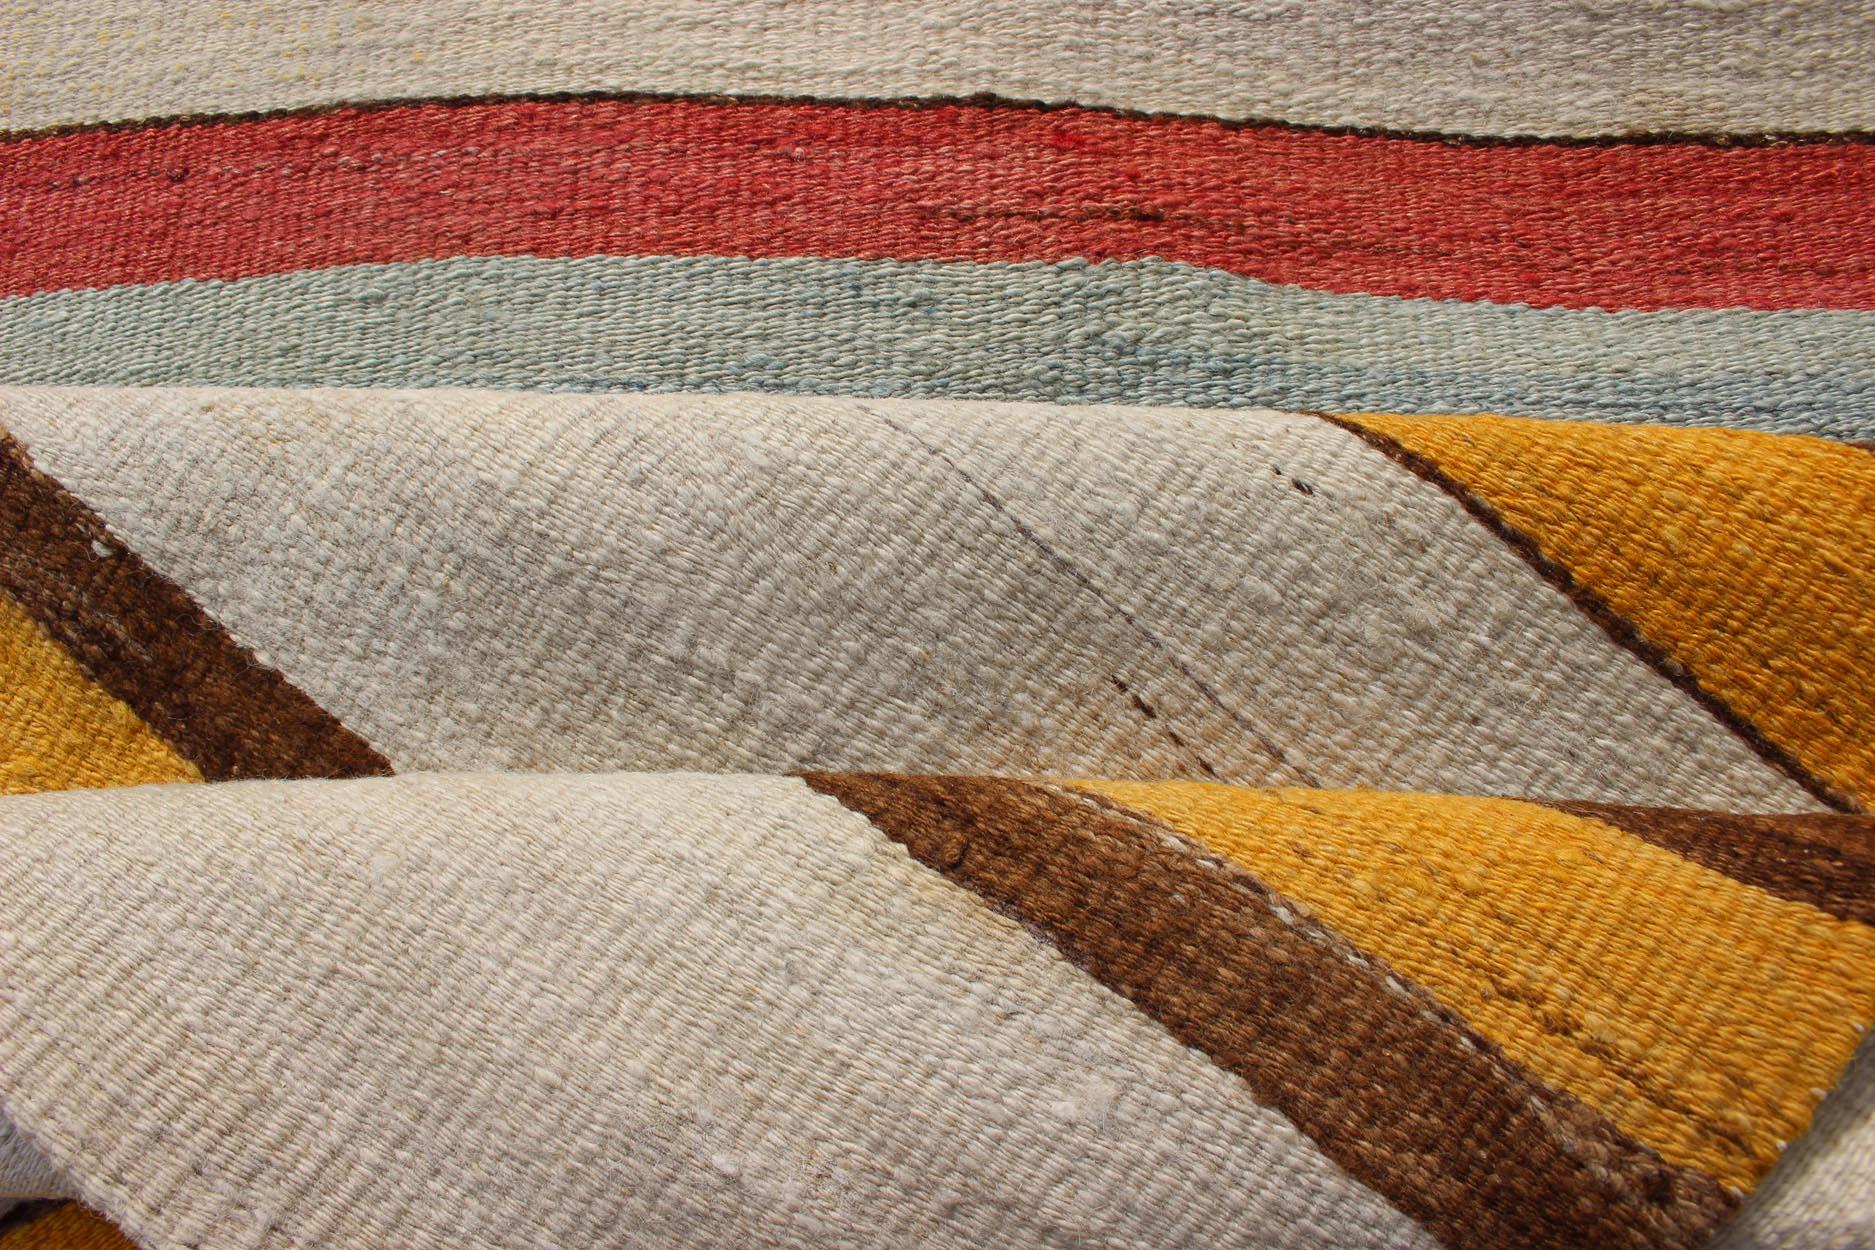  Vintage Colorful Kilim Runner With Stripe Design in Yellow, Ivory, Red & Brown  In Good Condition For Sale In Atlanta, GA